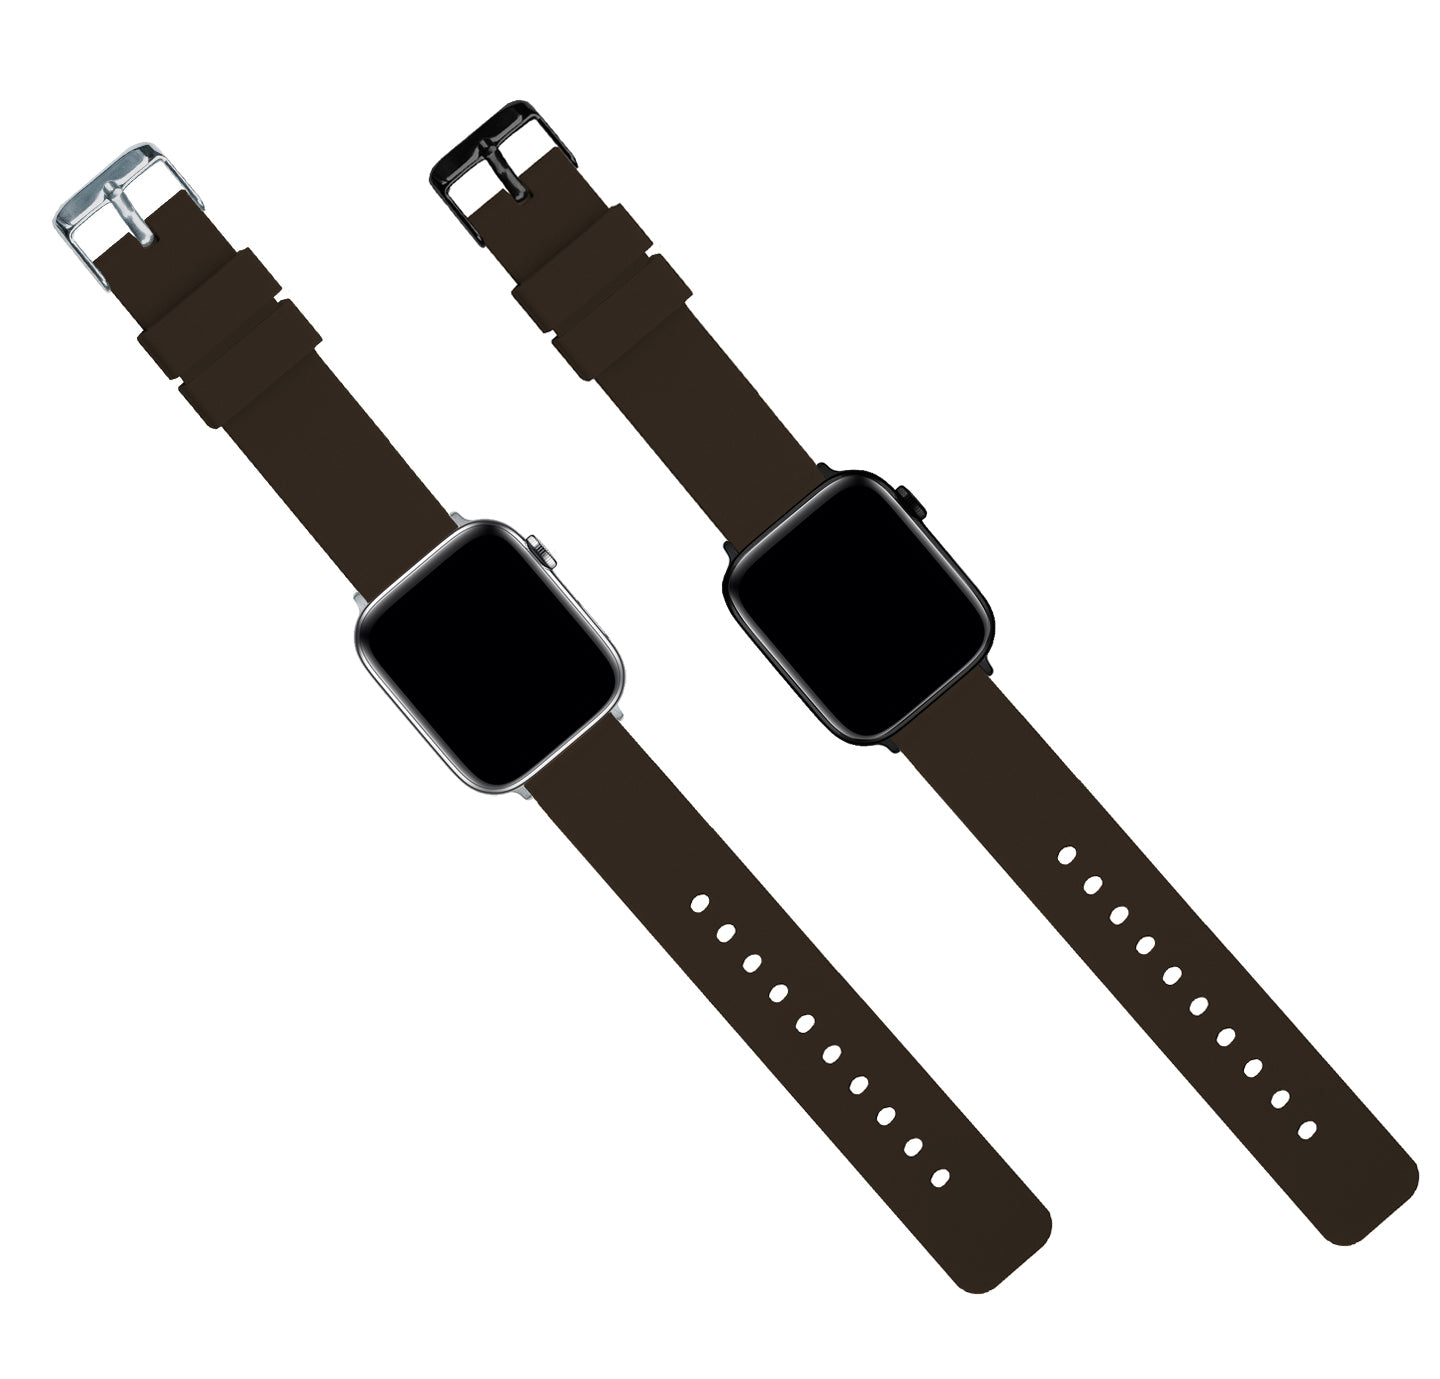 Apple Watch | Silicone |Brown - Barton Watch Bands